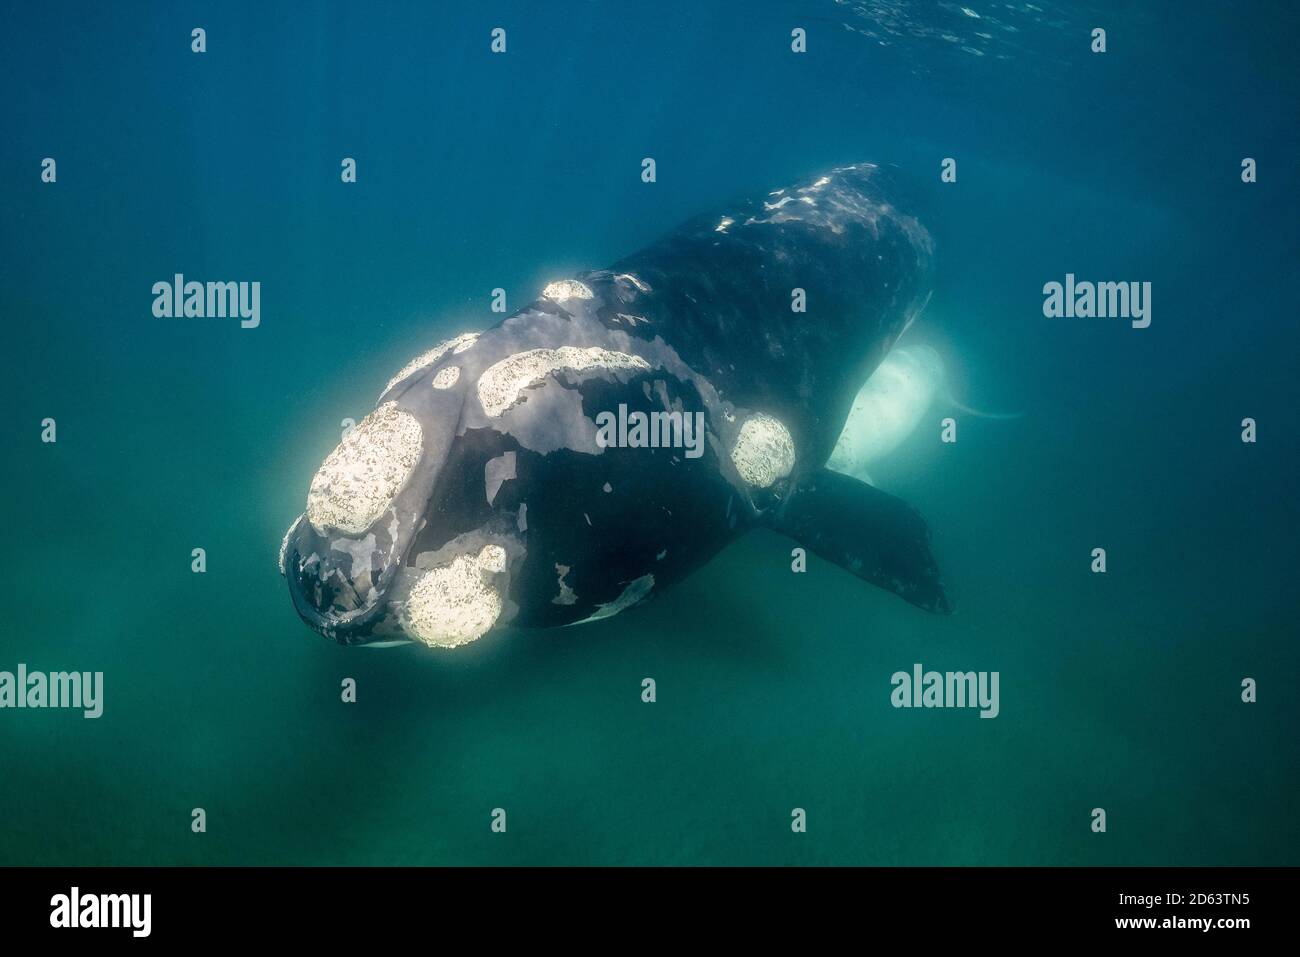 southern right whale, Eubalaena australis, and her white calf, in shallow water, Nuevo Gulf area, Valdes Peninsula, UNESCO World Heritage Site, Argent Stock Photo